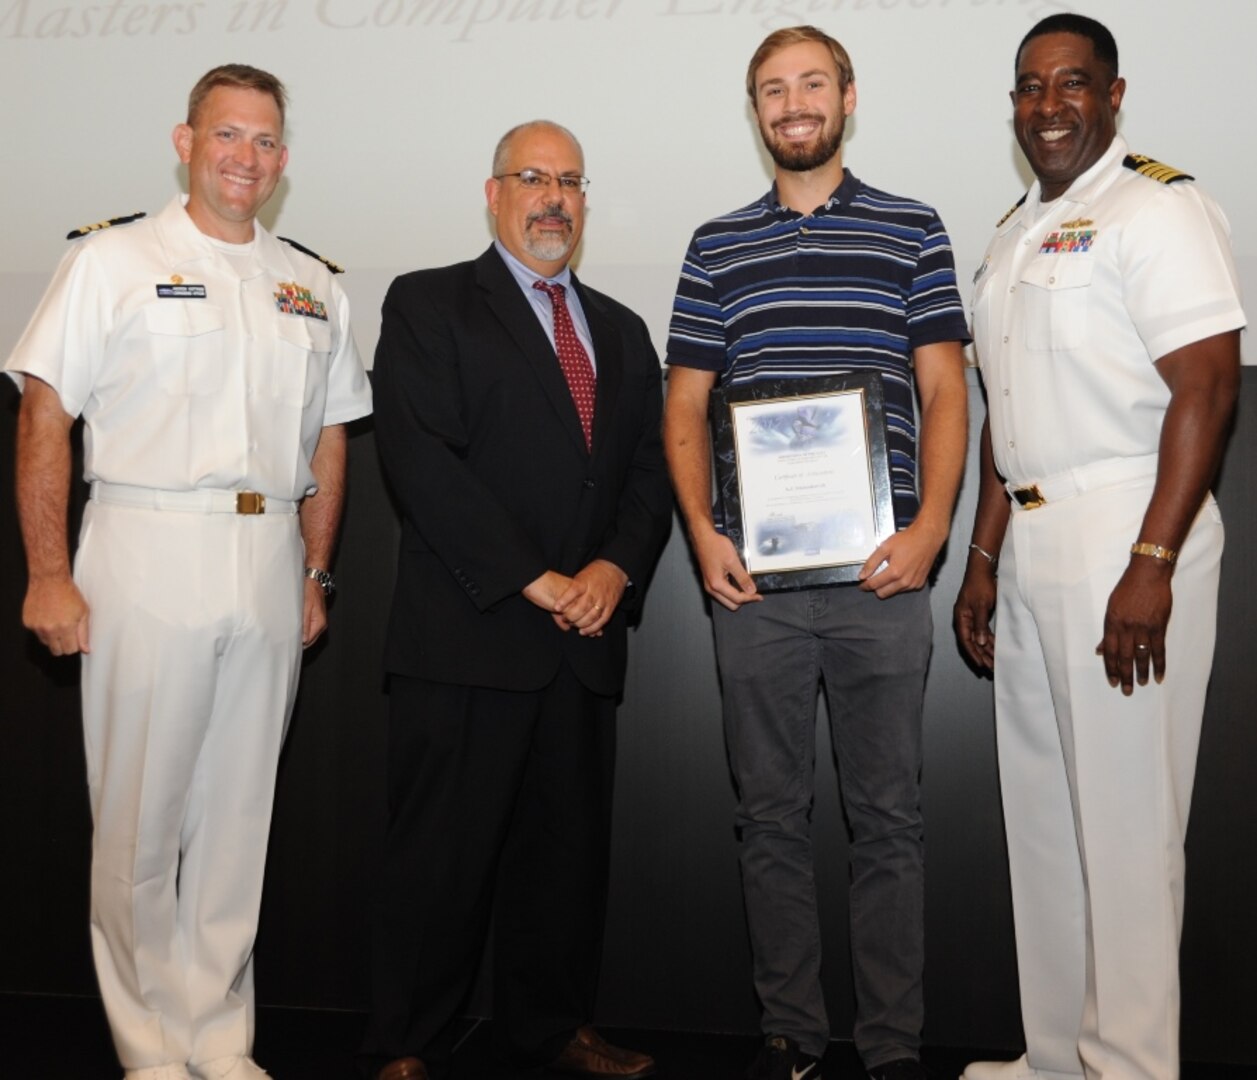 IMAGE: DAHLGREN, Va. - A.J. Stamenkovich receives his certificate of achievement from Naval Surface Warfare Center Dahlgren Division (NSWCDD) Technical Director John Fiore, NSWCDD Commanding Officer Capt. Godfrey 'Gus' Weekes, right, and Combat Direction Systems Activity Dam Neck Commanding Officer Cmdr. Andrew Hoffman at the 2017 NSWCDD academic awards ceremony. Stamenkovich was recognized for completing his master's in computer engineering from Old Dominion University, and commended for his commitment to personal and professional development.